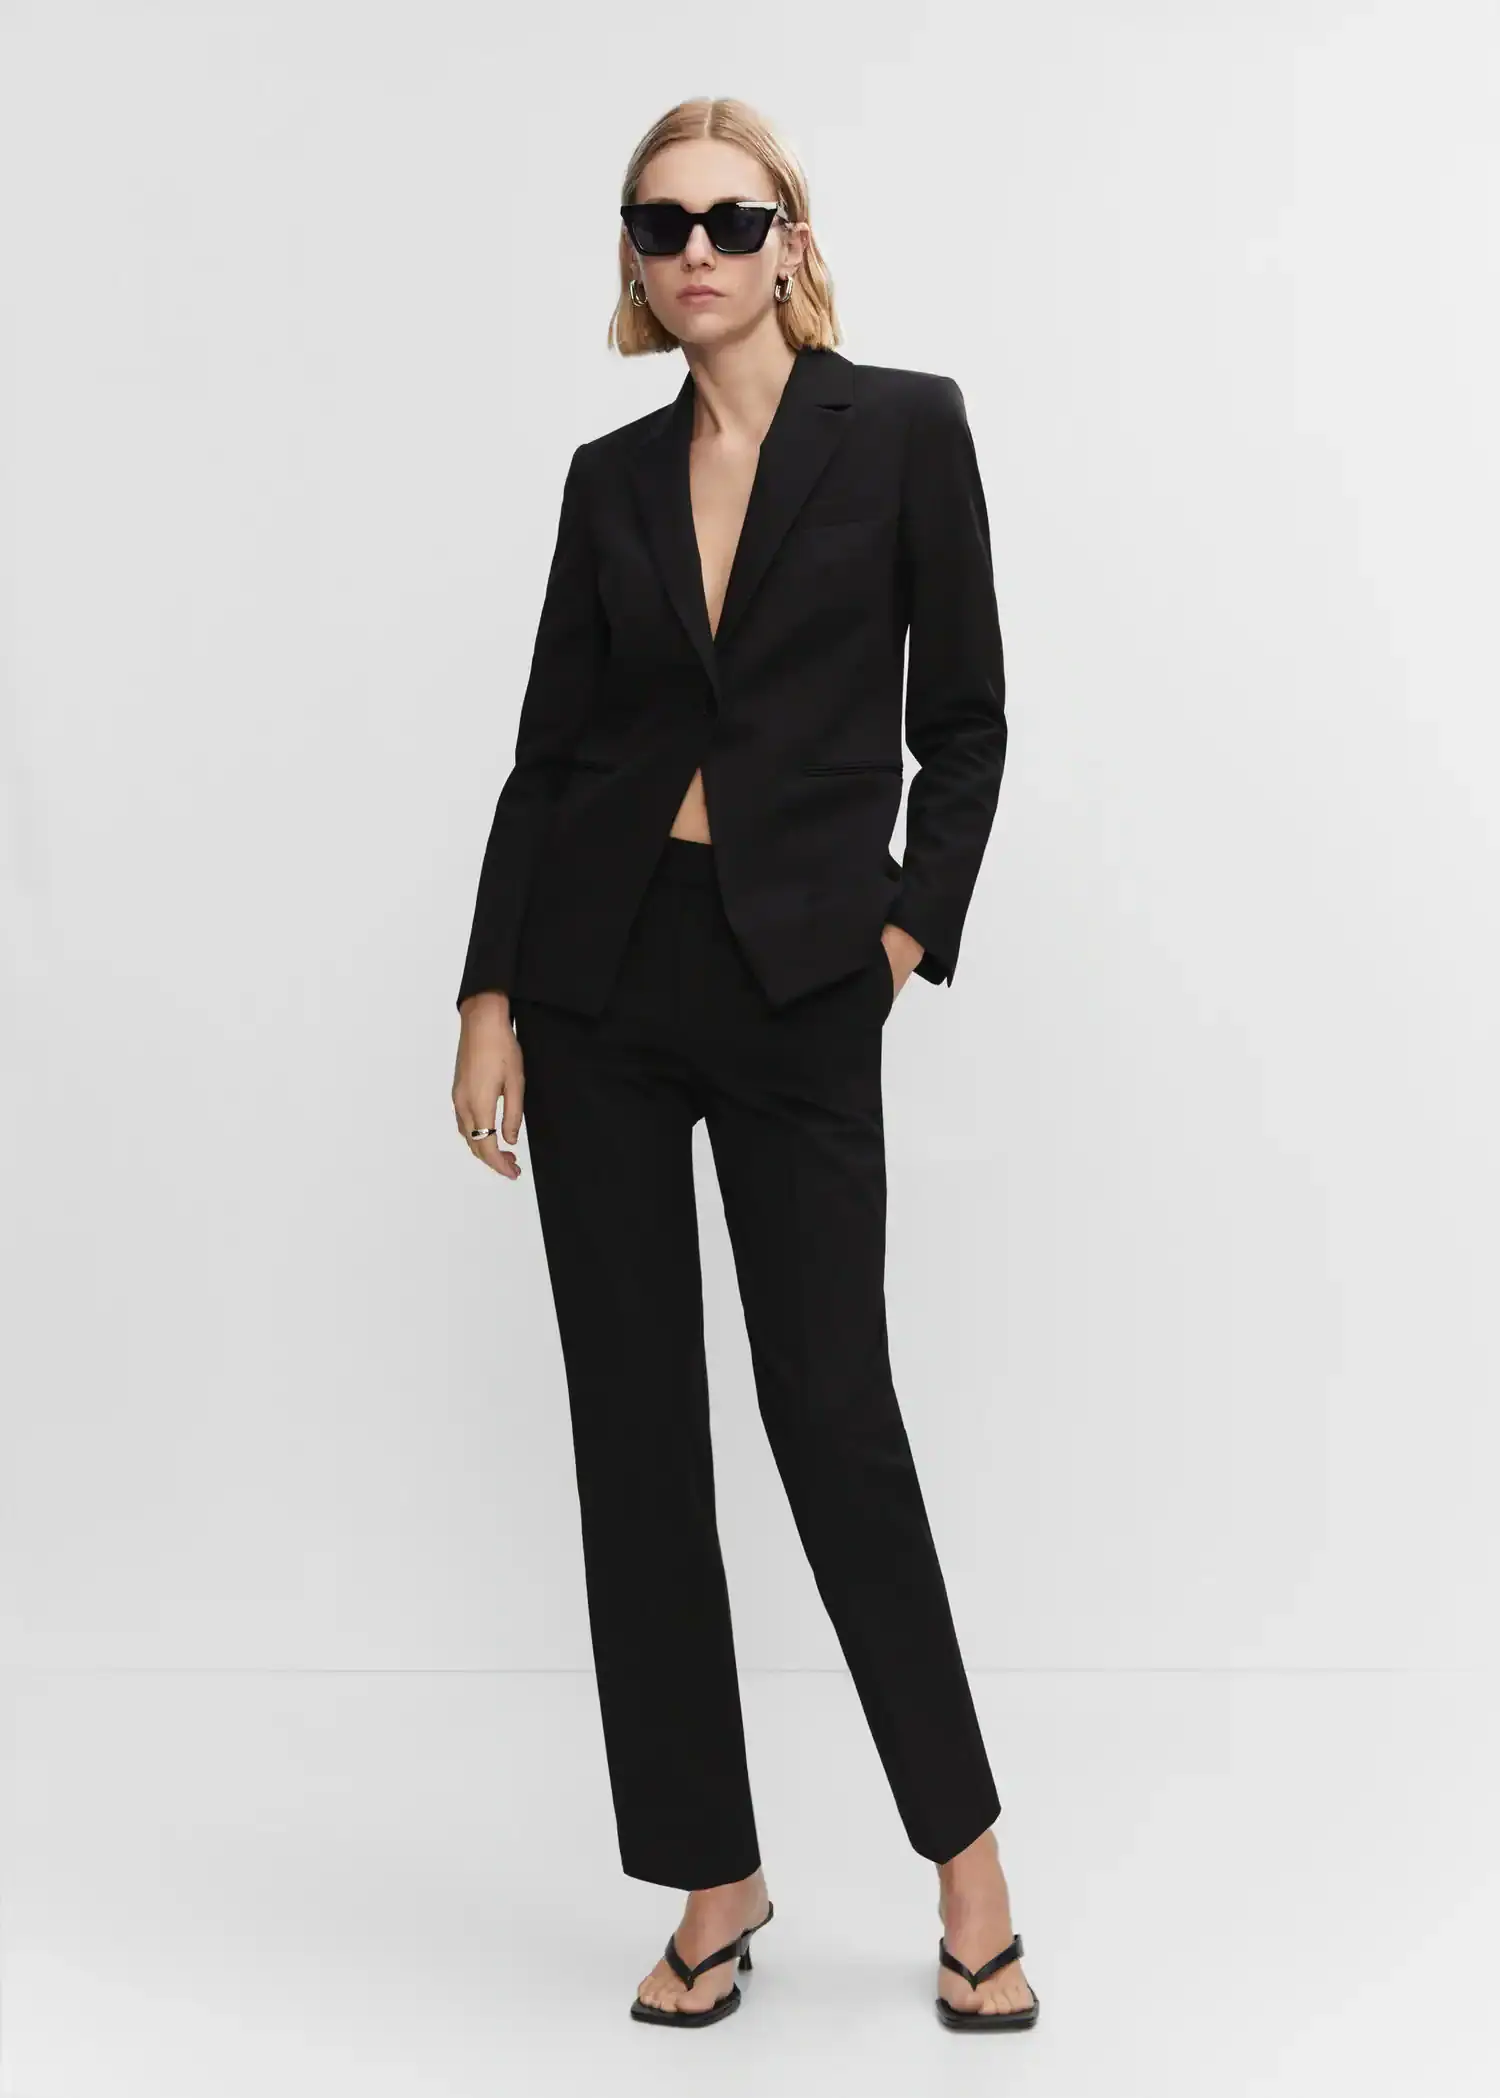 Mango Fitted suit blazer. a woman in a black suit standing in front of a white wall. 